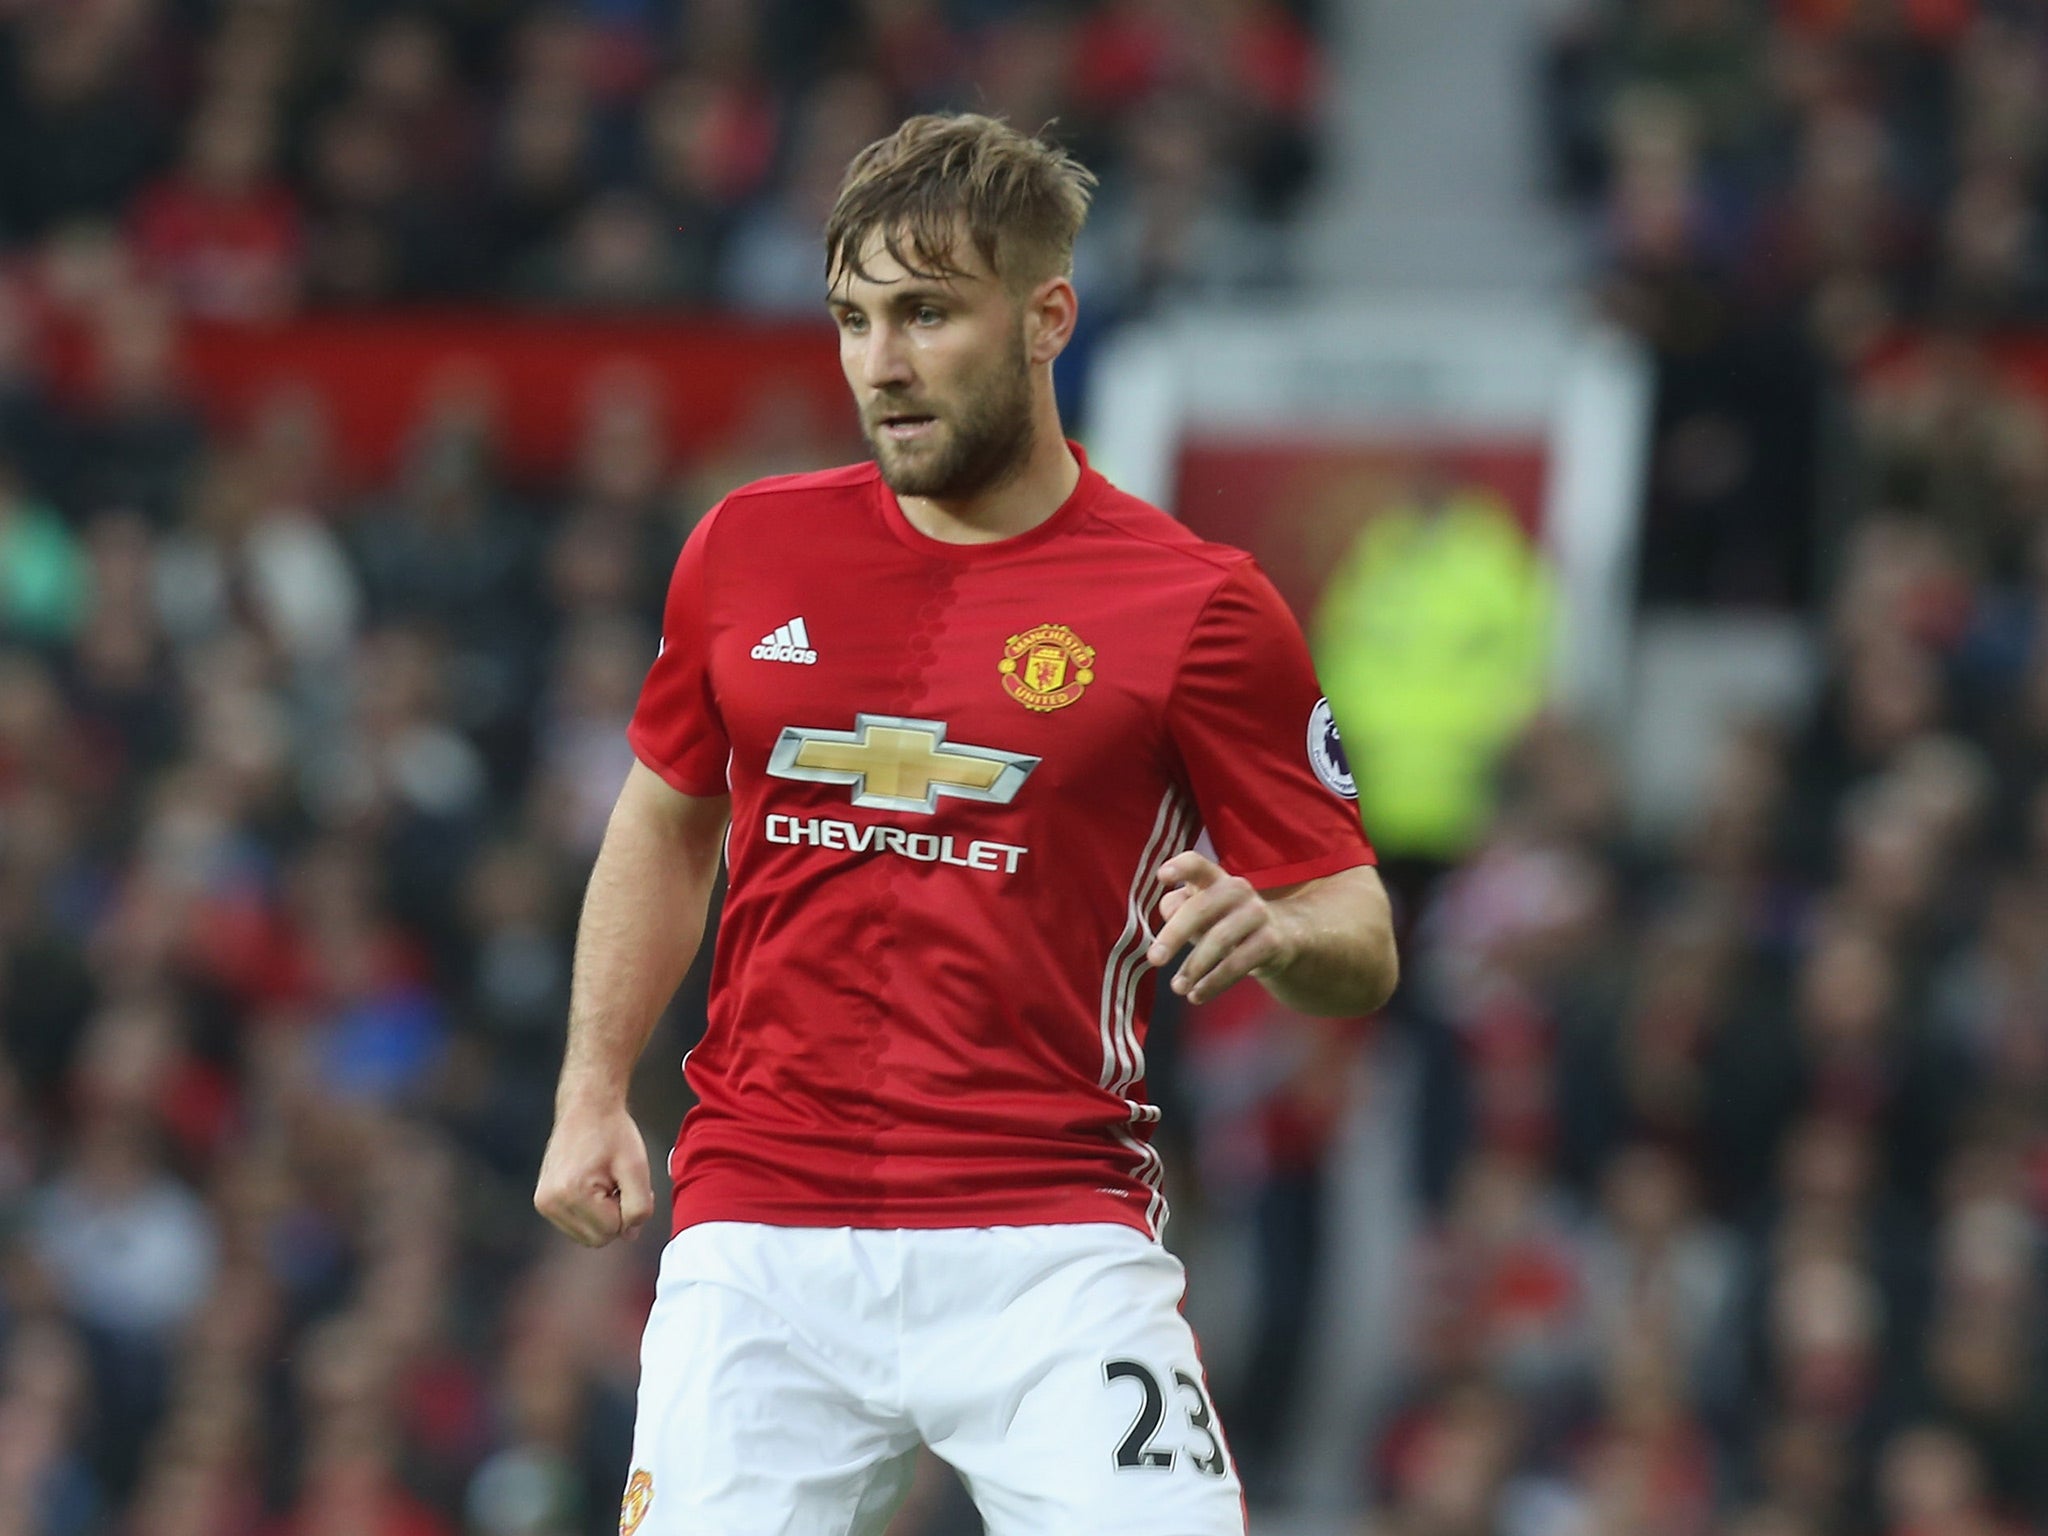 Luke Shaw has not played a single minute in the league since October